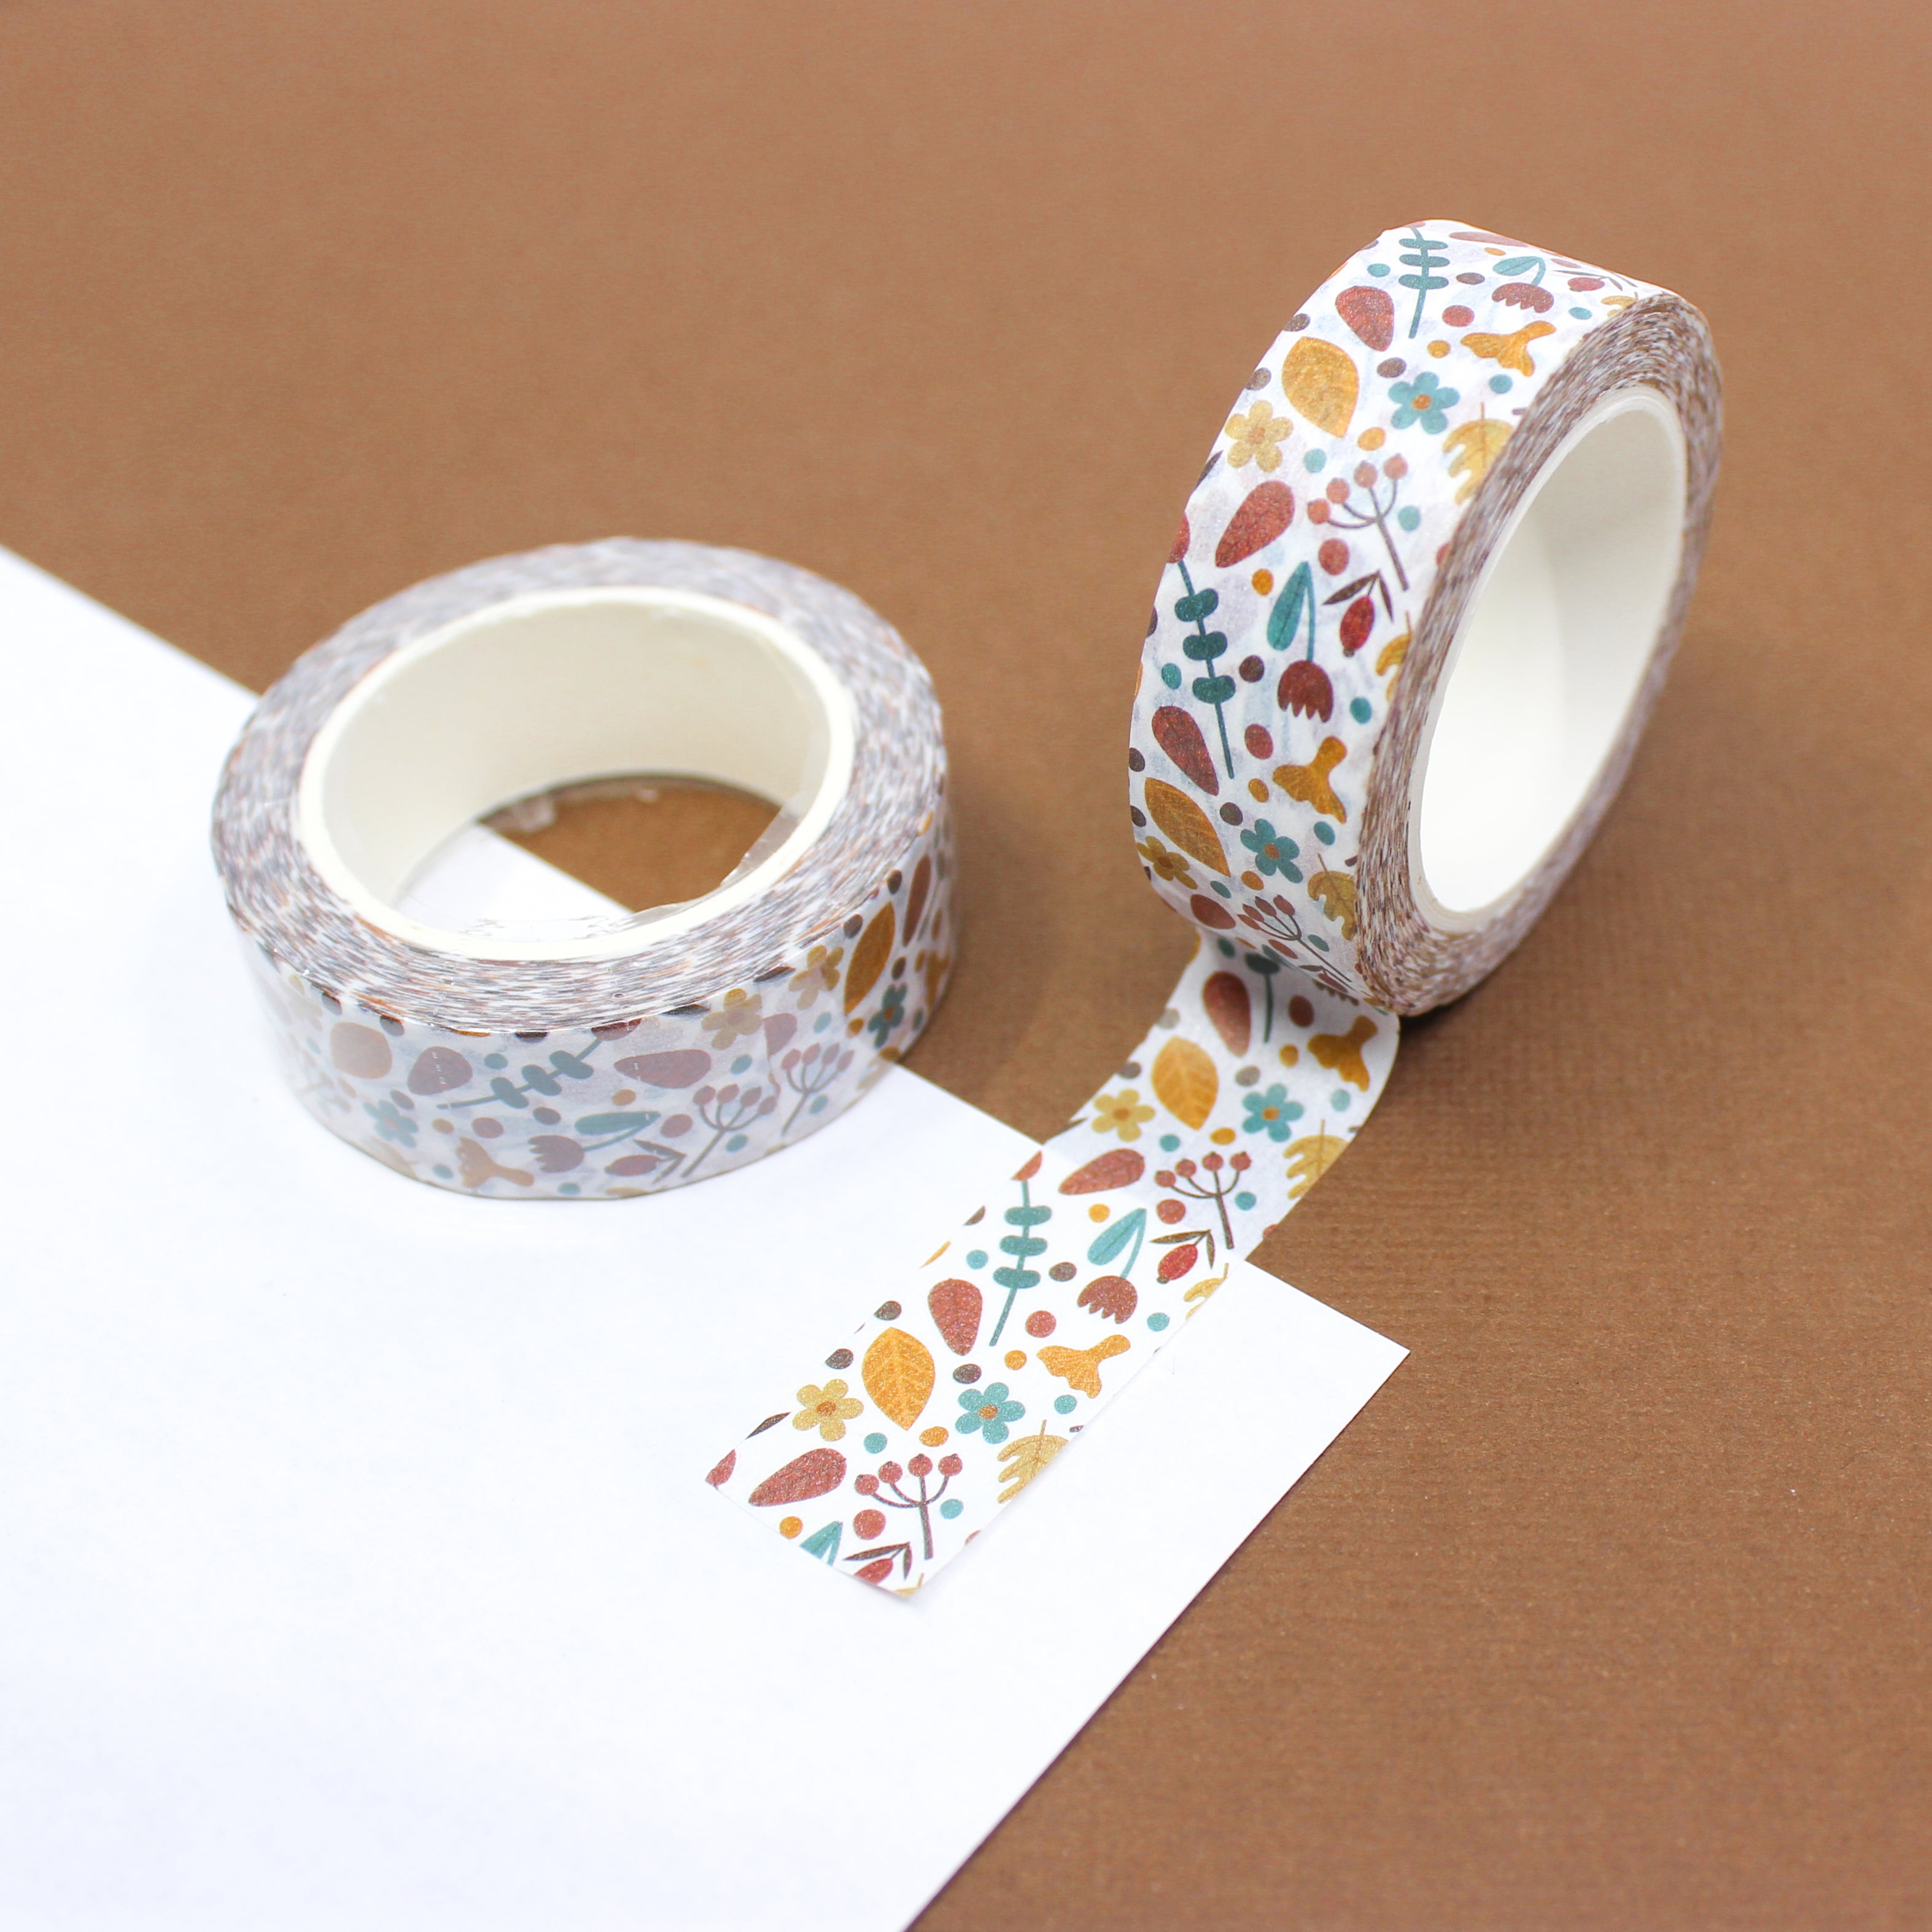 This is a cute fall leaves pattern washi tape from BBB Supplies Craft Shop